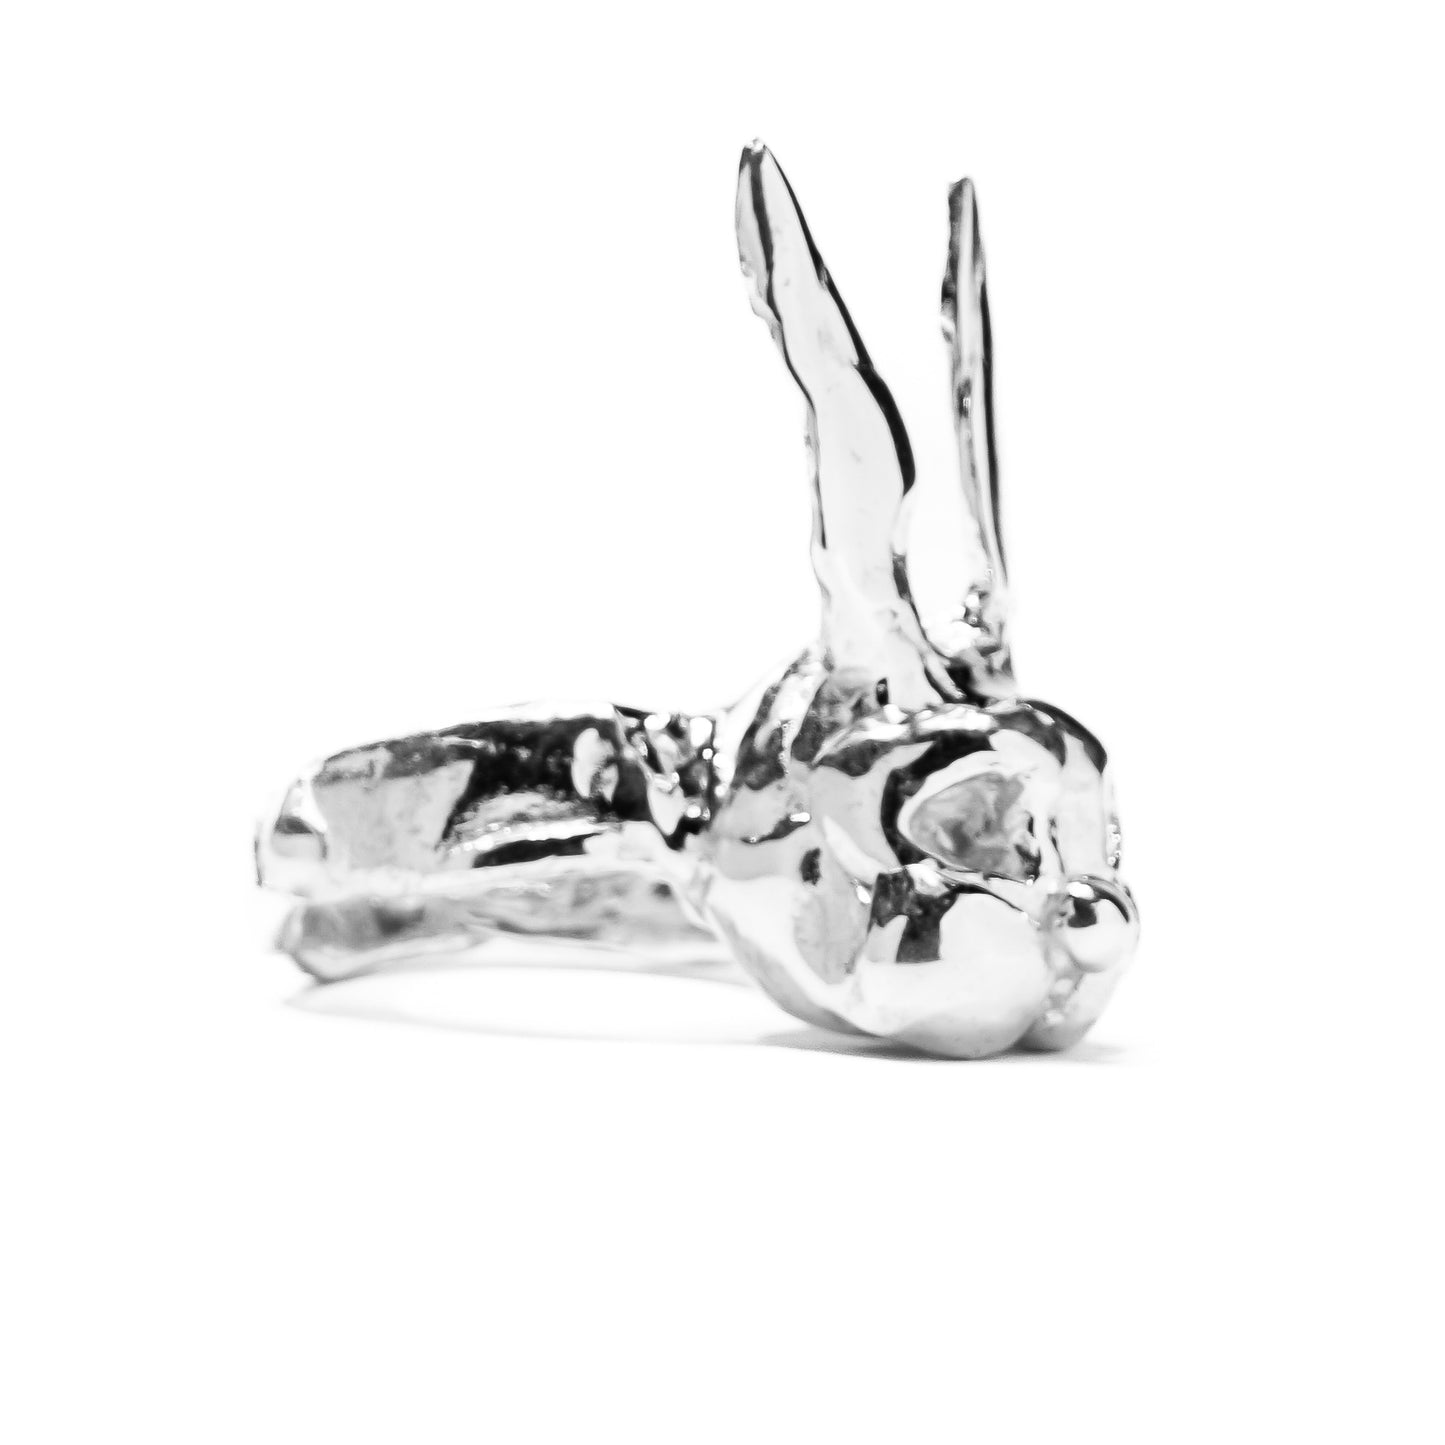 Donnie Darko Silver Skull Bunny Head Statement Ring - Handmade Frank the Bunny Inspired - Perfect Easter Gift- Medium size